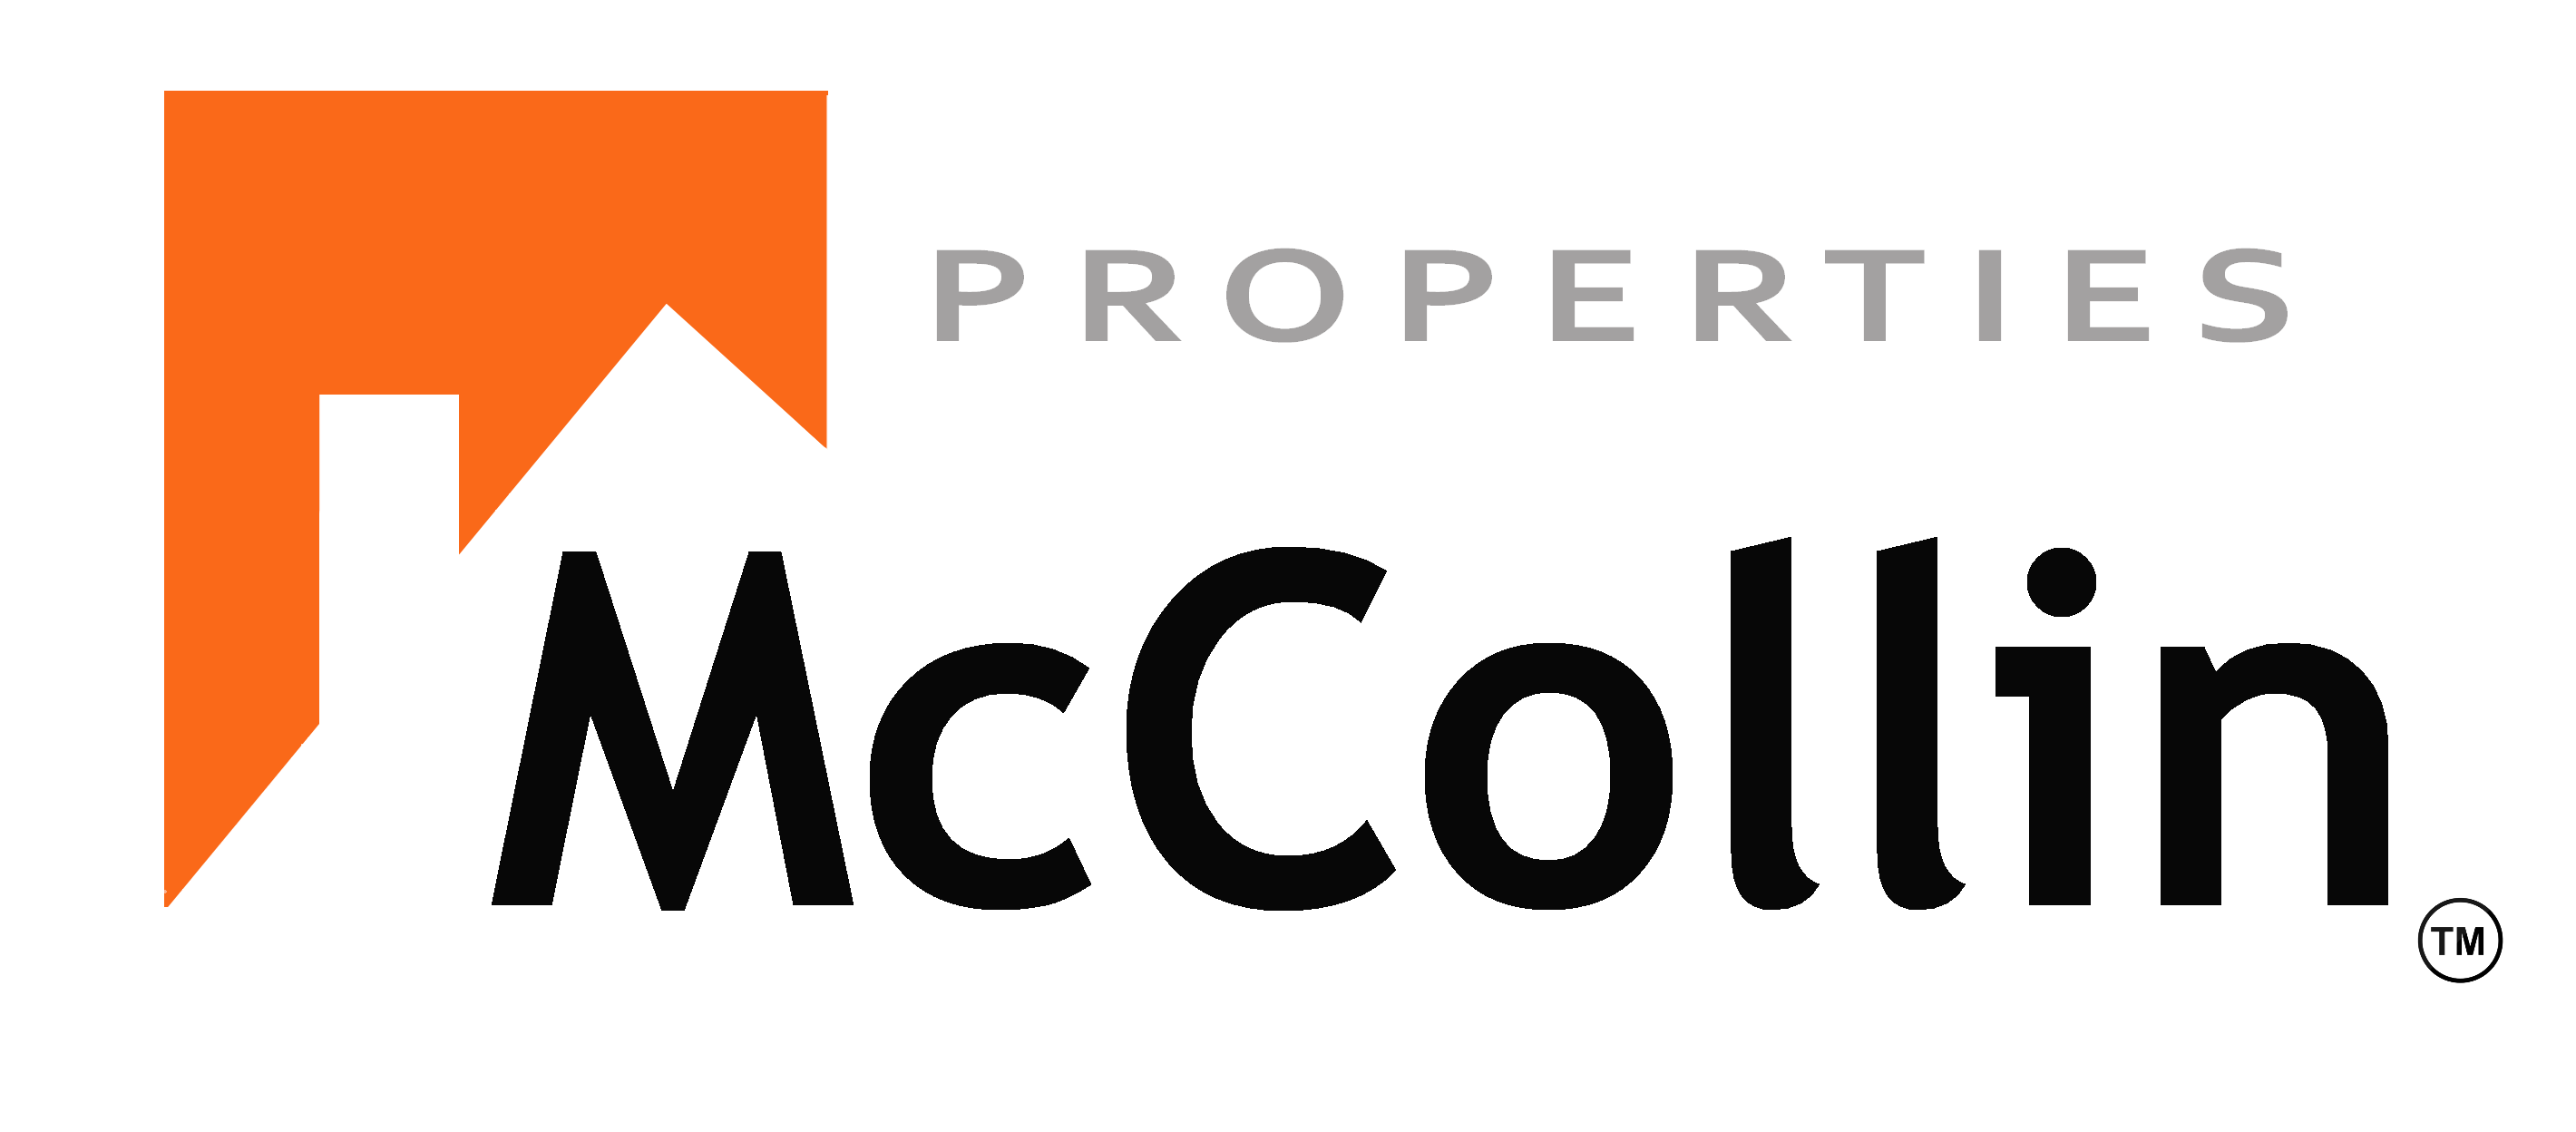 Mccollin Properties-McCollin Properties help you book for viewing of new launches in Singapore with developer discounts.